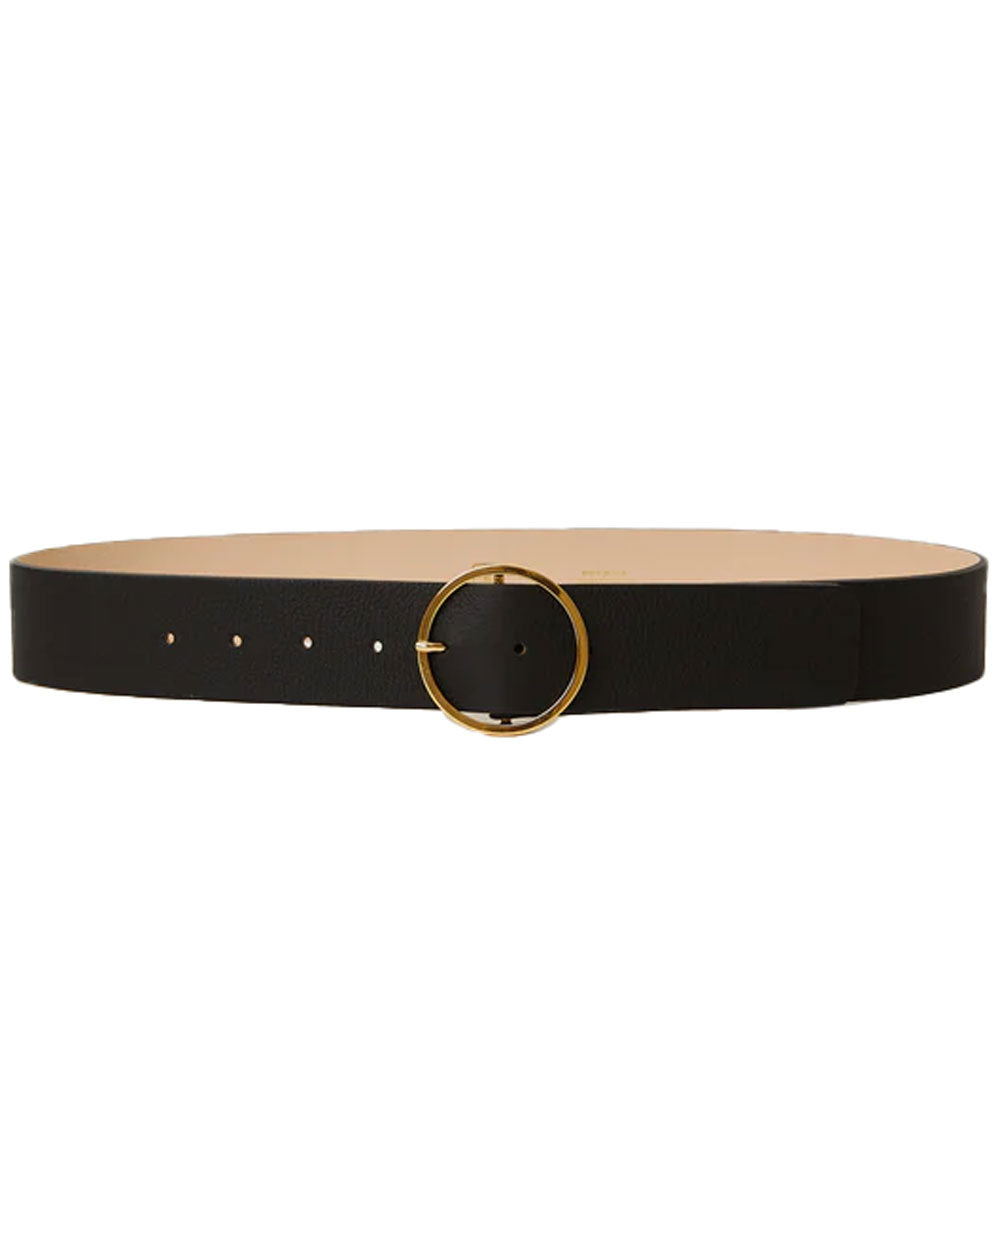 Molly Leather Belt in Black and Gold